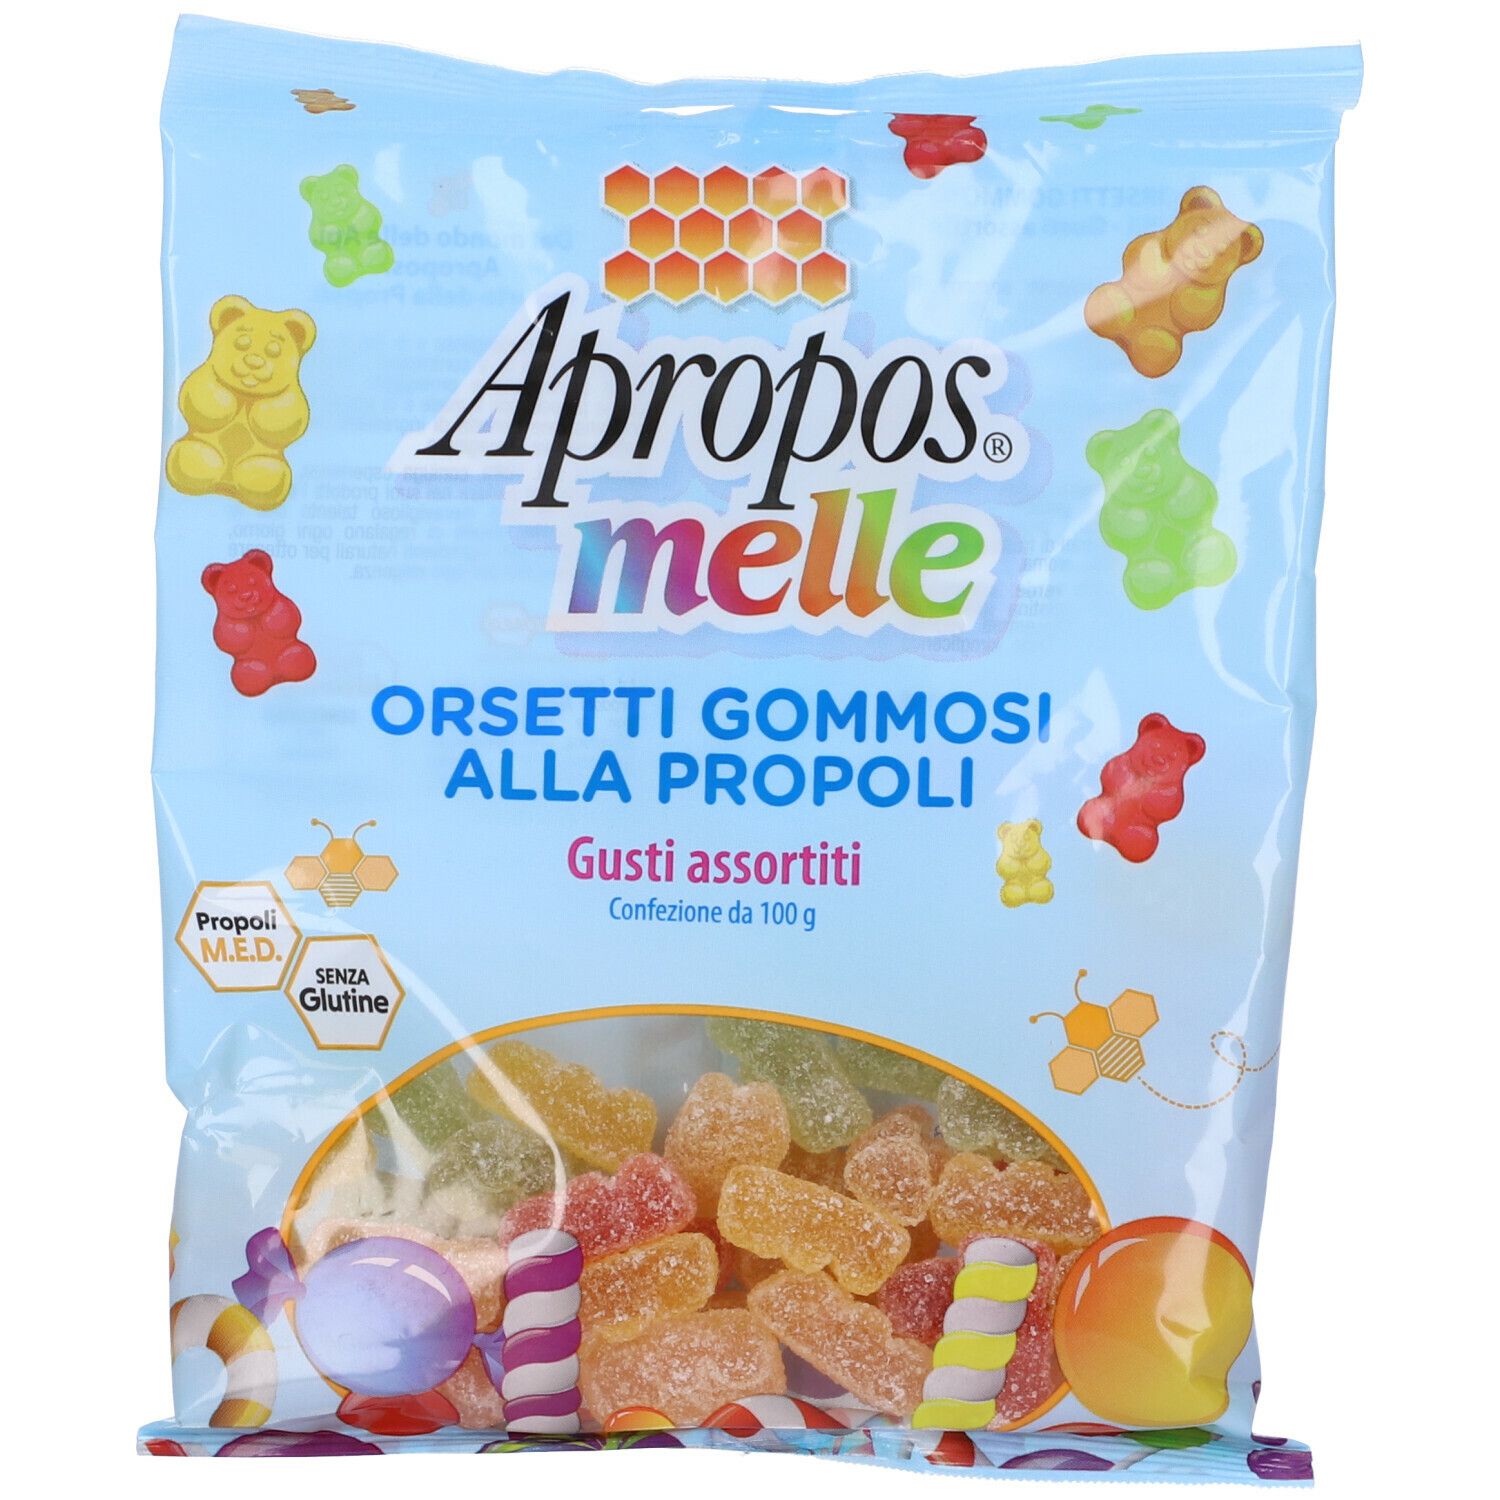 Apropos Protezione Inverno Melle Caramelle Gelee